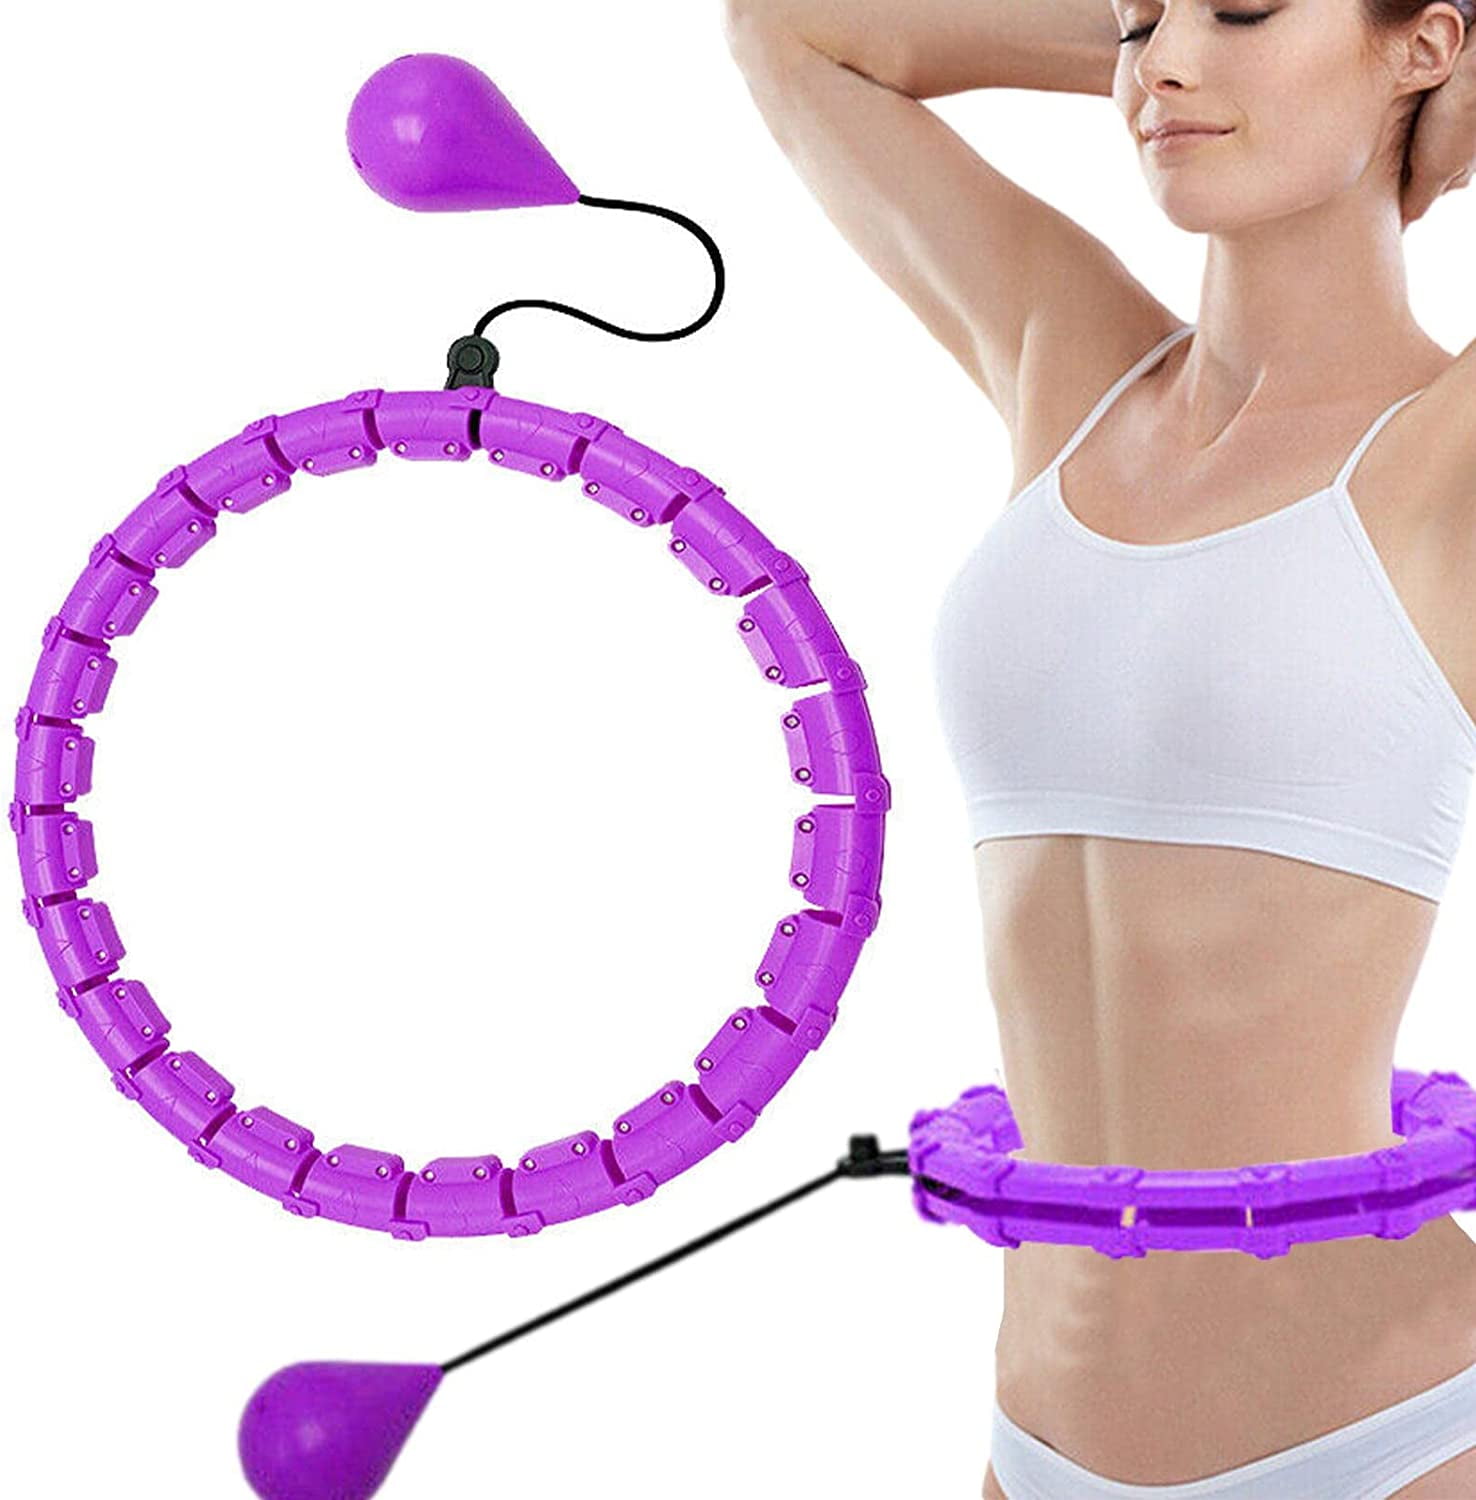 Smart Hula Weighted Hoop for Adults Weight Loss,Non-Fall Fitness Infinity Hoop 2 in 1 Abdomen Fitness Massage Hoola Hoop Plus Size Exercise Hoop 